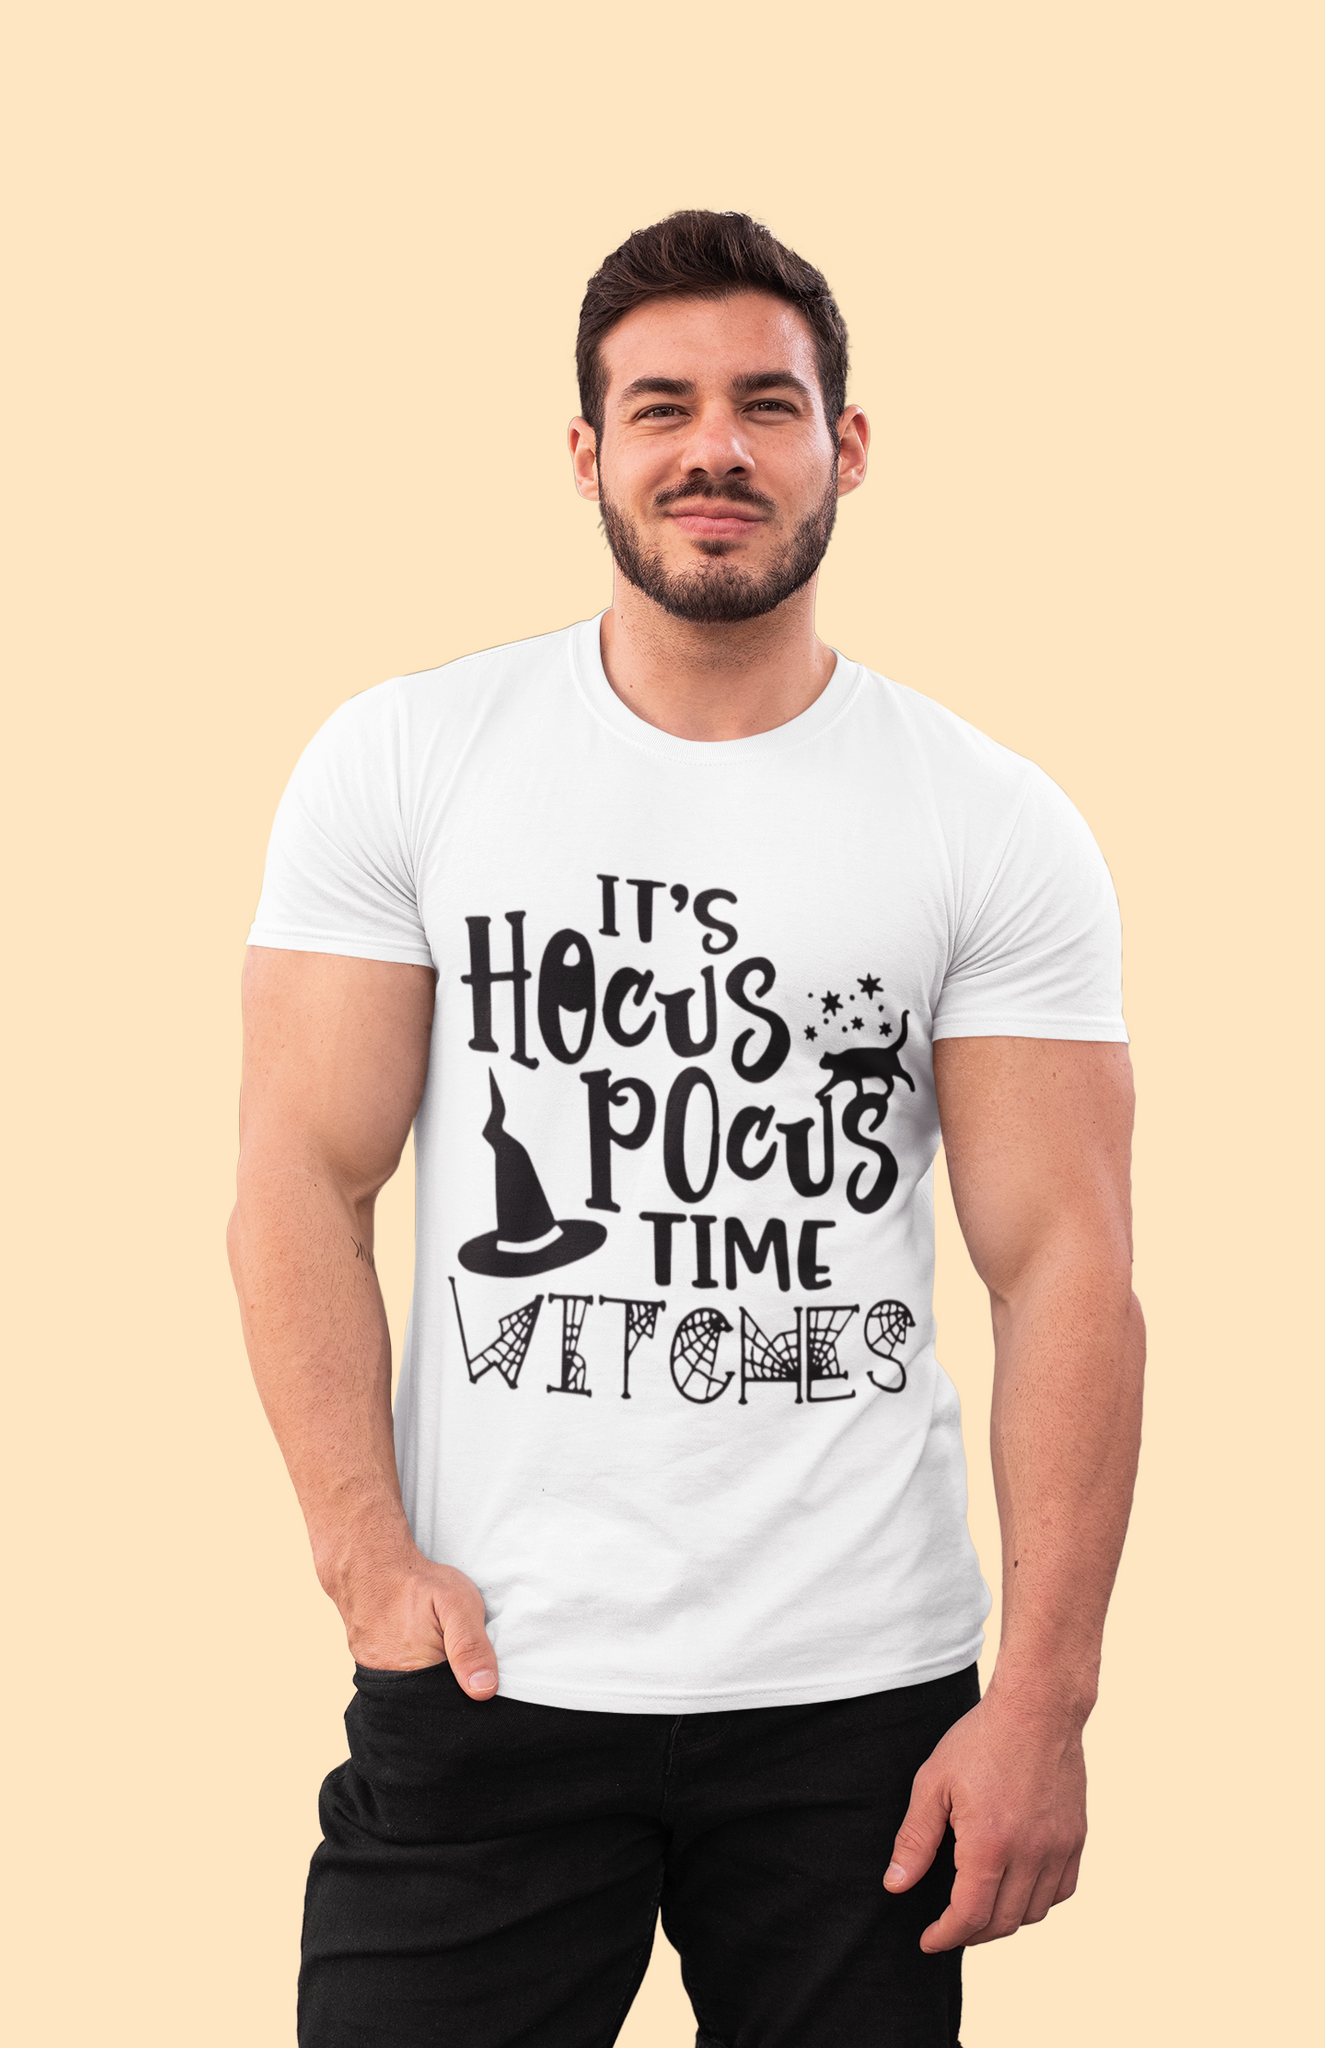 Hocus Pocus T Shirt, Its Hocus Pocua Time Witches Shirt, Halloween Gifts